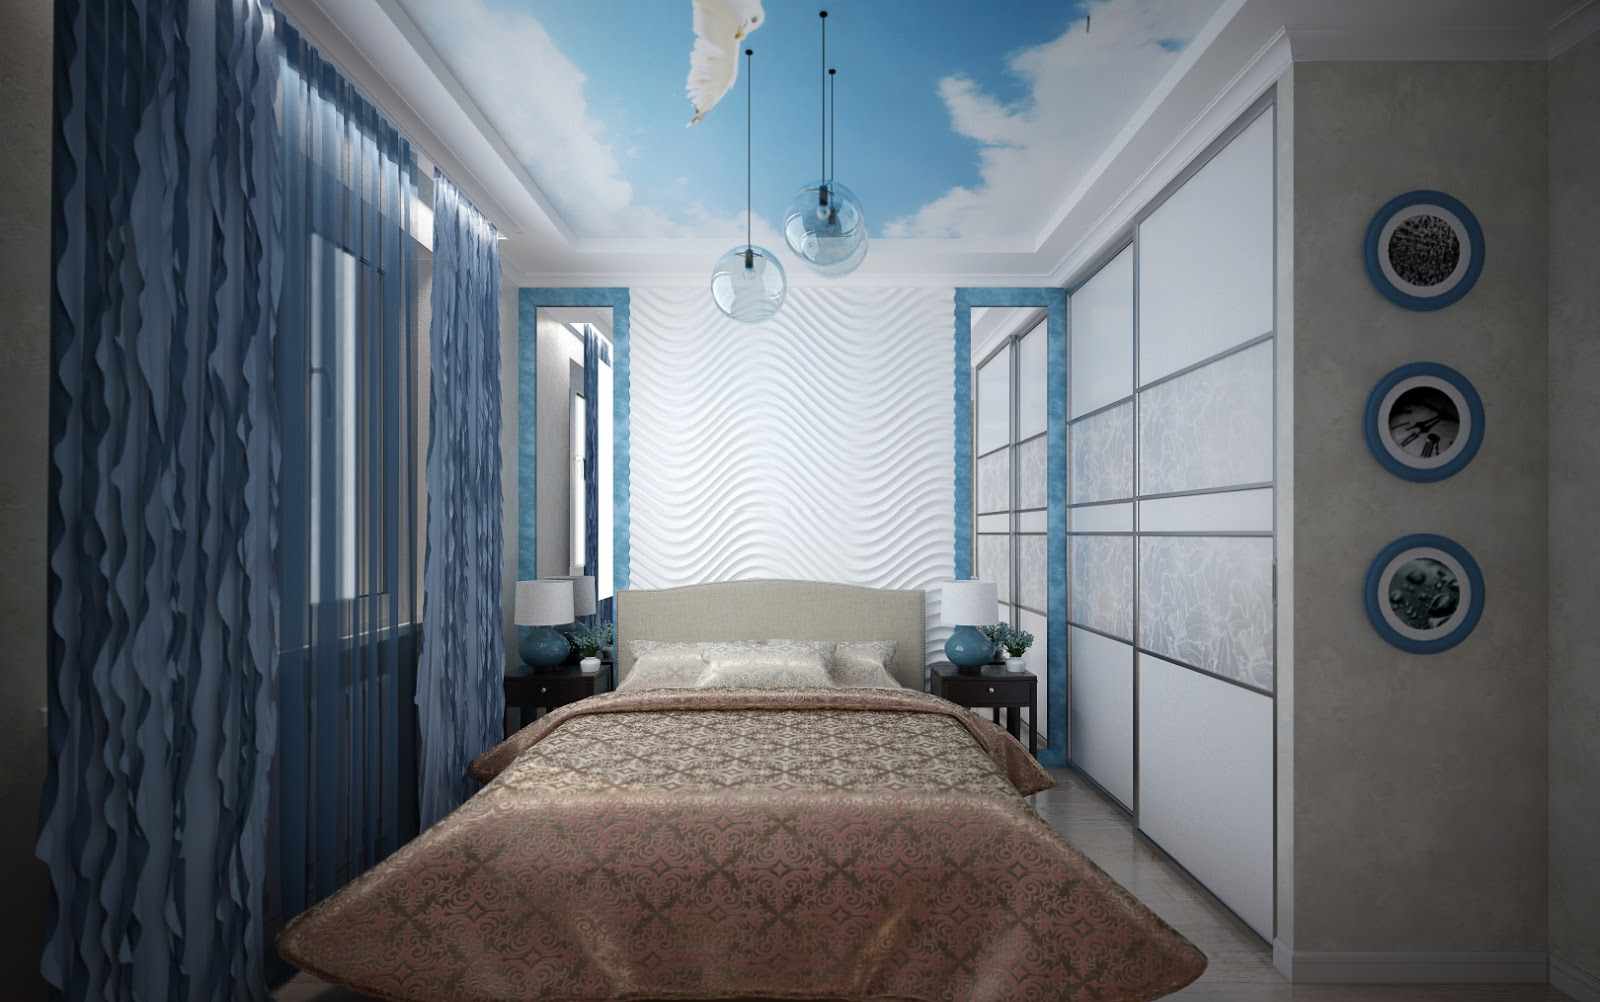 An example of a bright bedroom decor